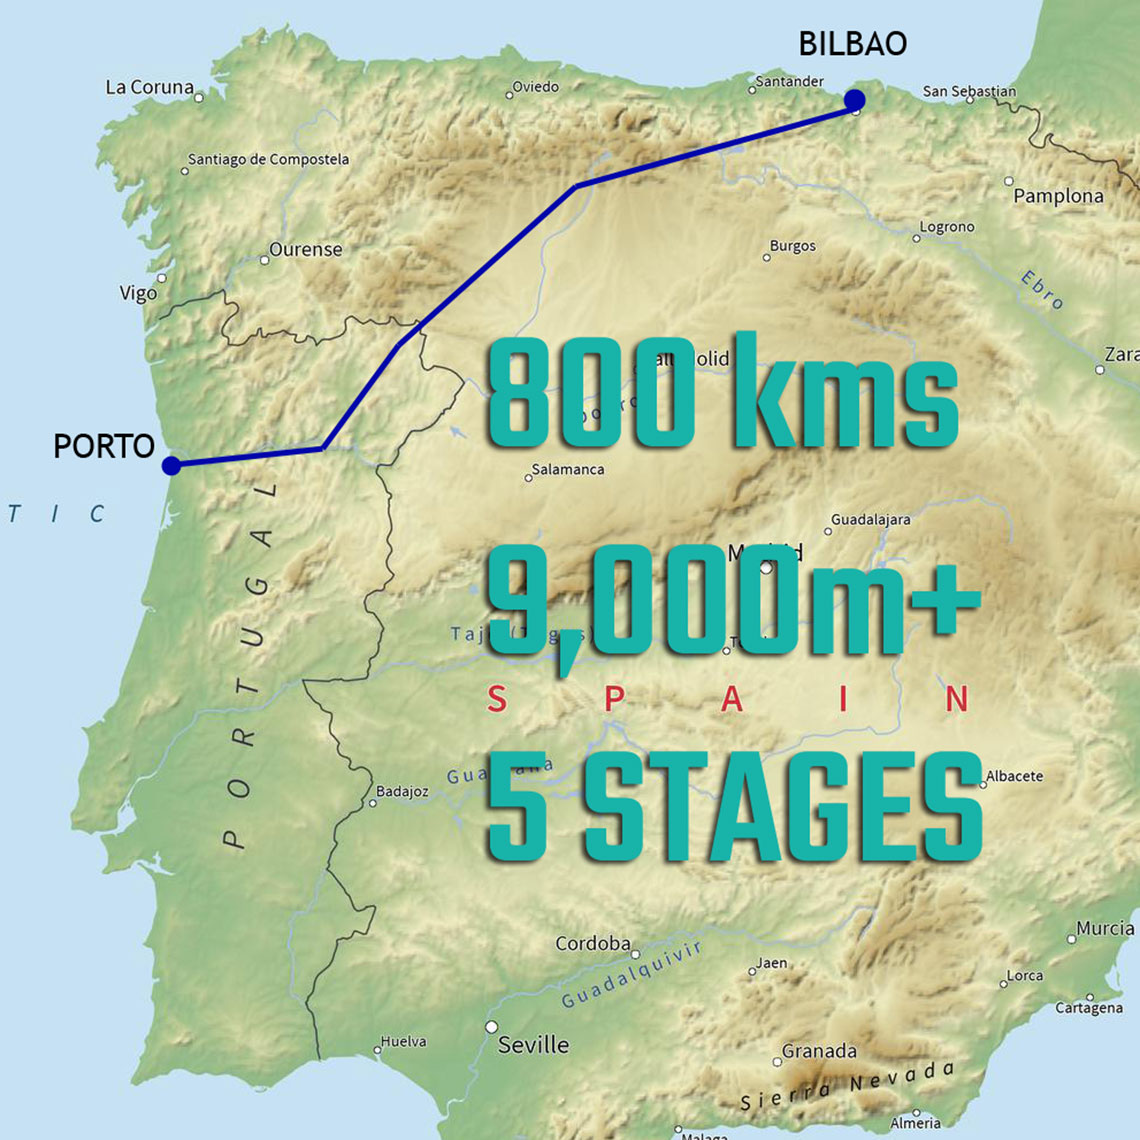 Map of route for 800km TRANS-IBERIAN Challenge